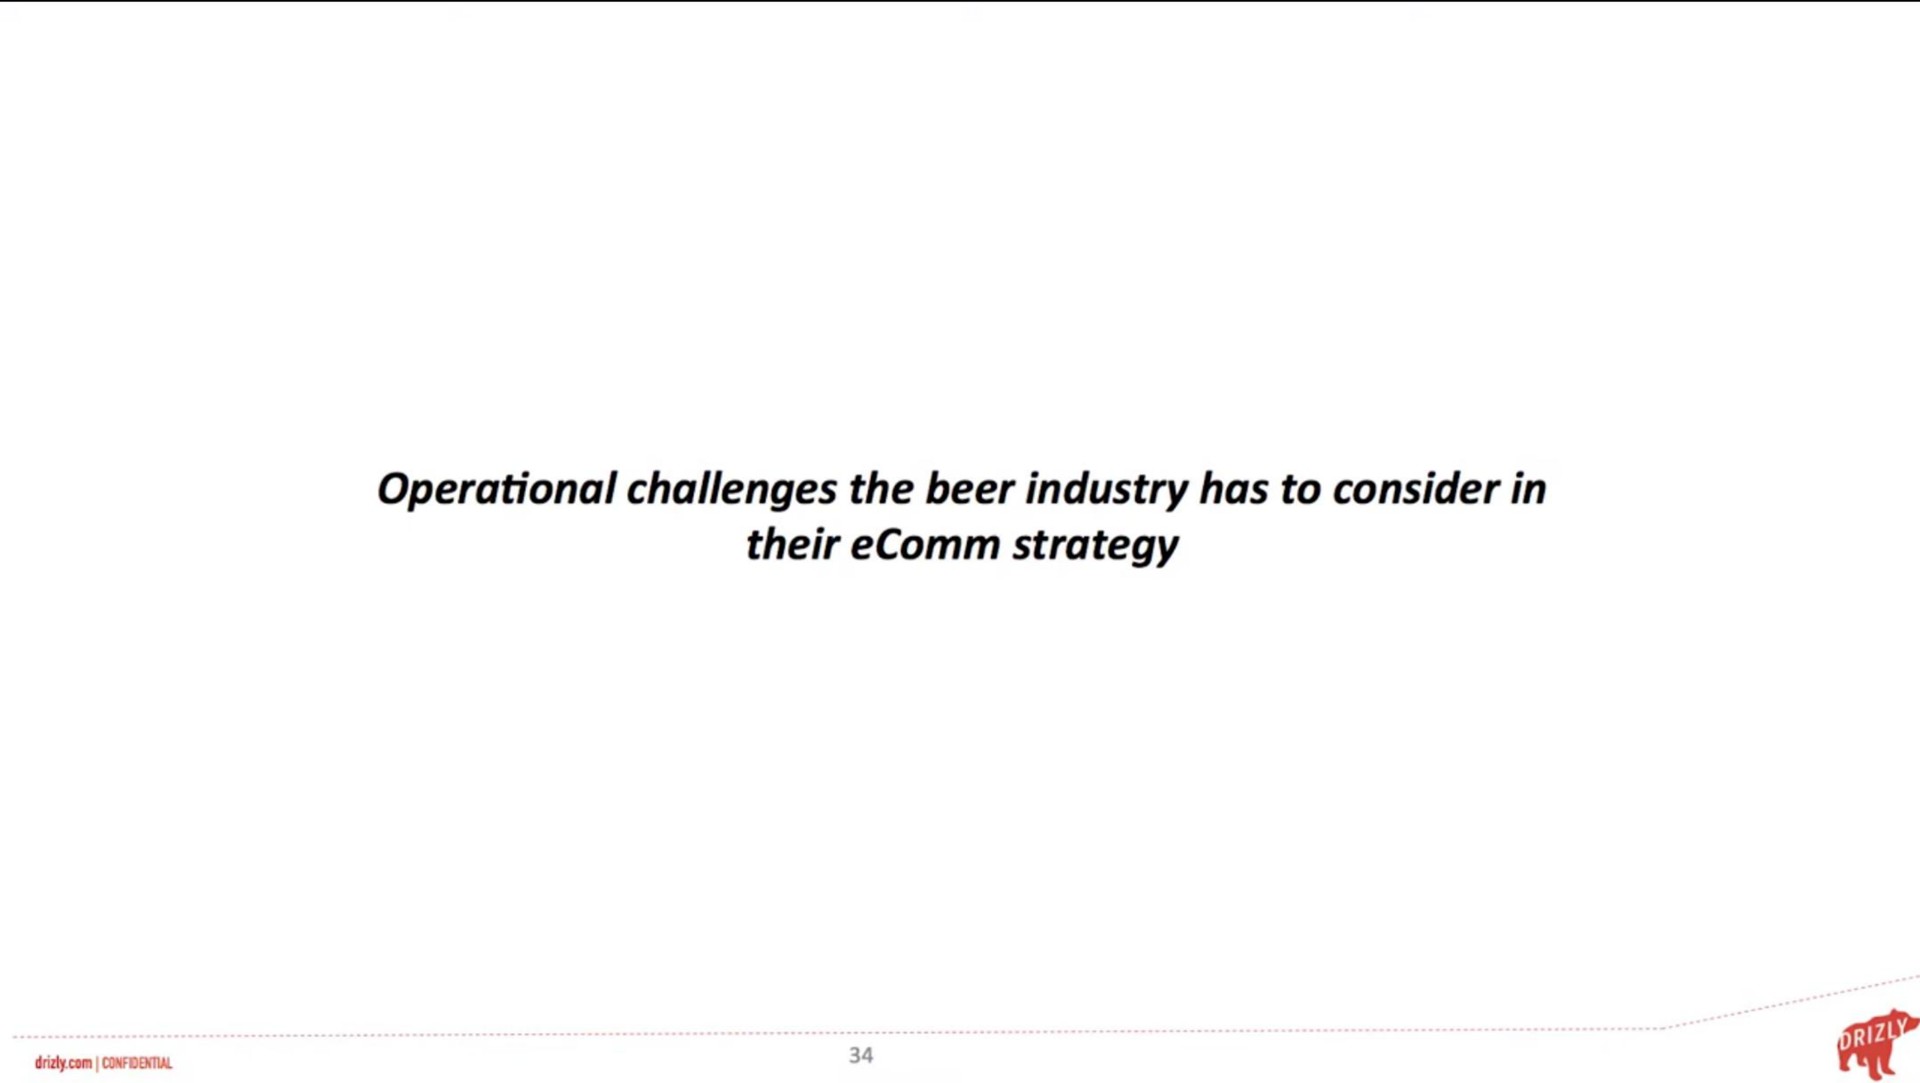 operational challenges the beer industry has to consider in their strategy | Drizly